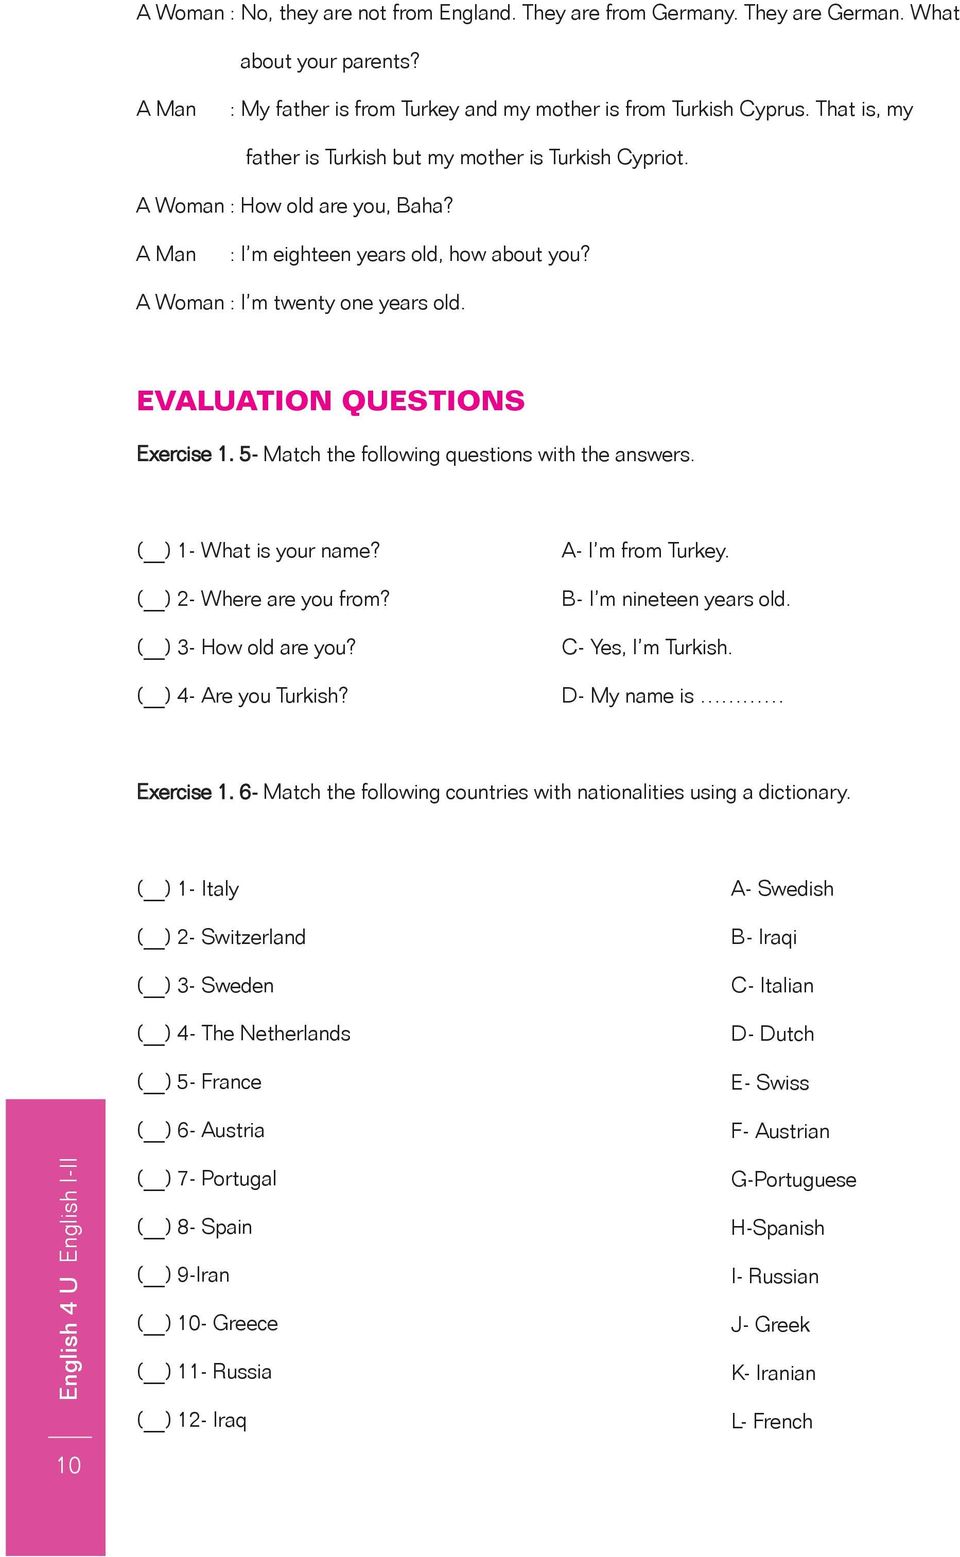 EVALUATION QUESTIONS Exercise 1. 5- Match the following questions with the answers. ( ) 1- What is your name? ( ) 2- Where are you from? ( ) 3- How old are you? ( ) 4- Are you Turkish?